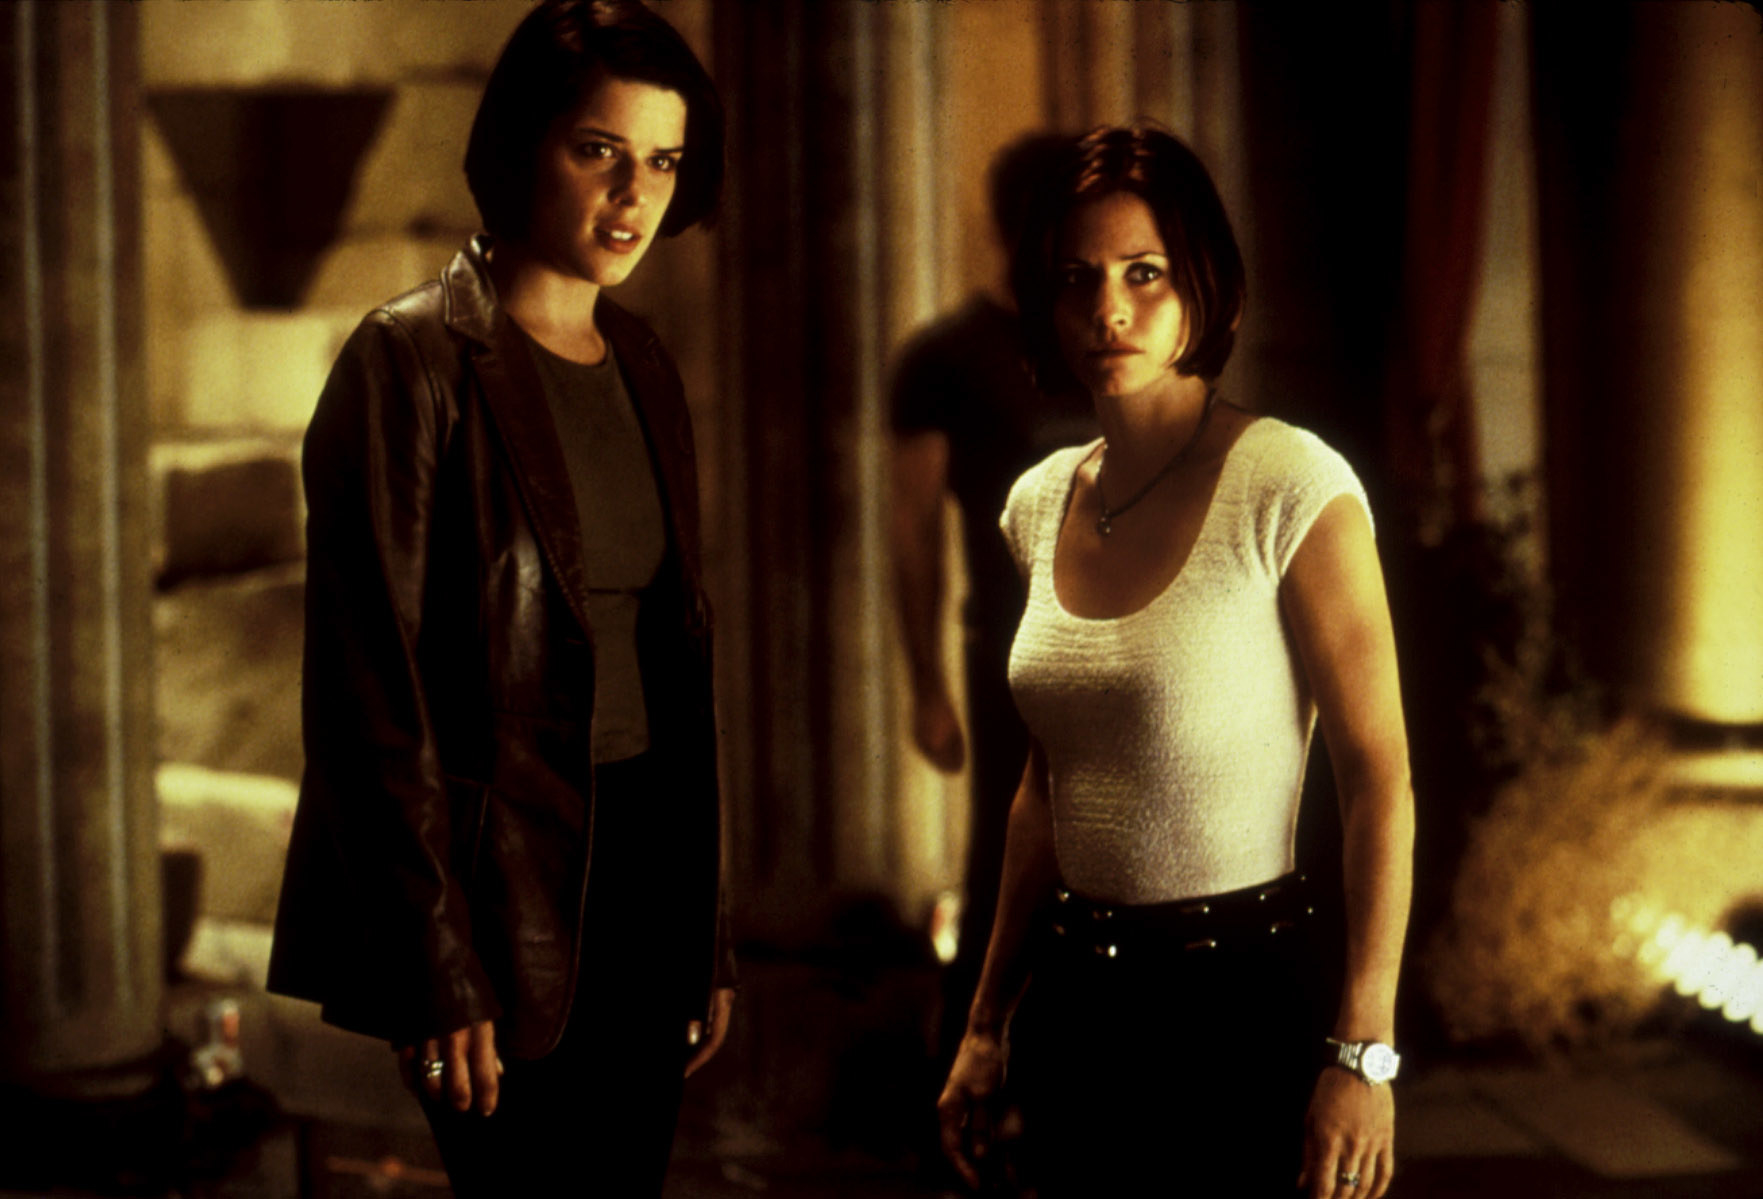 Courteney and Neve stand together in the film and look at something with concern